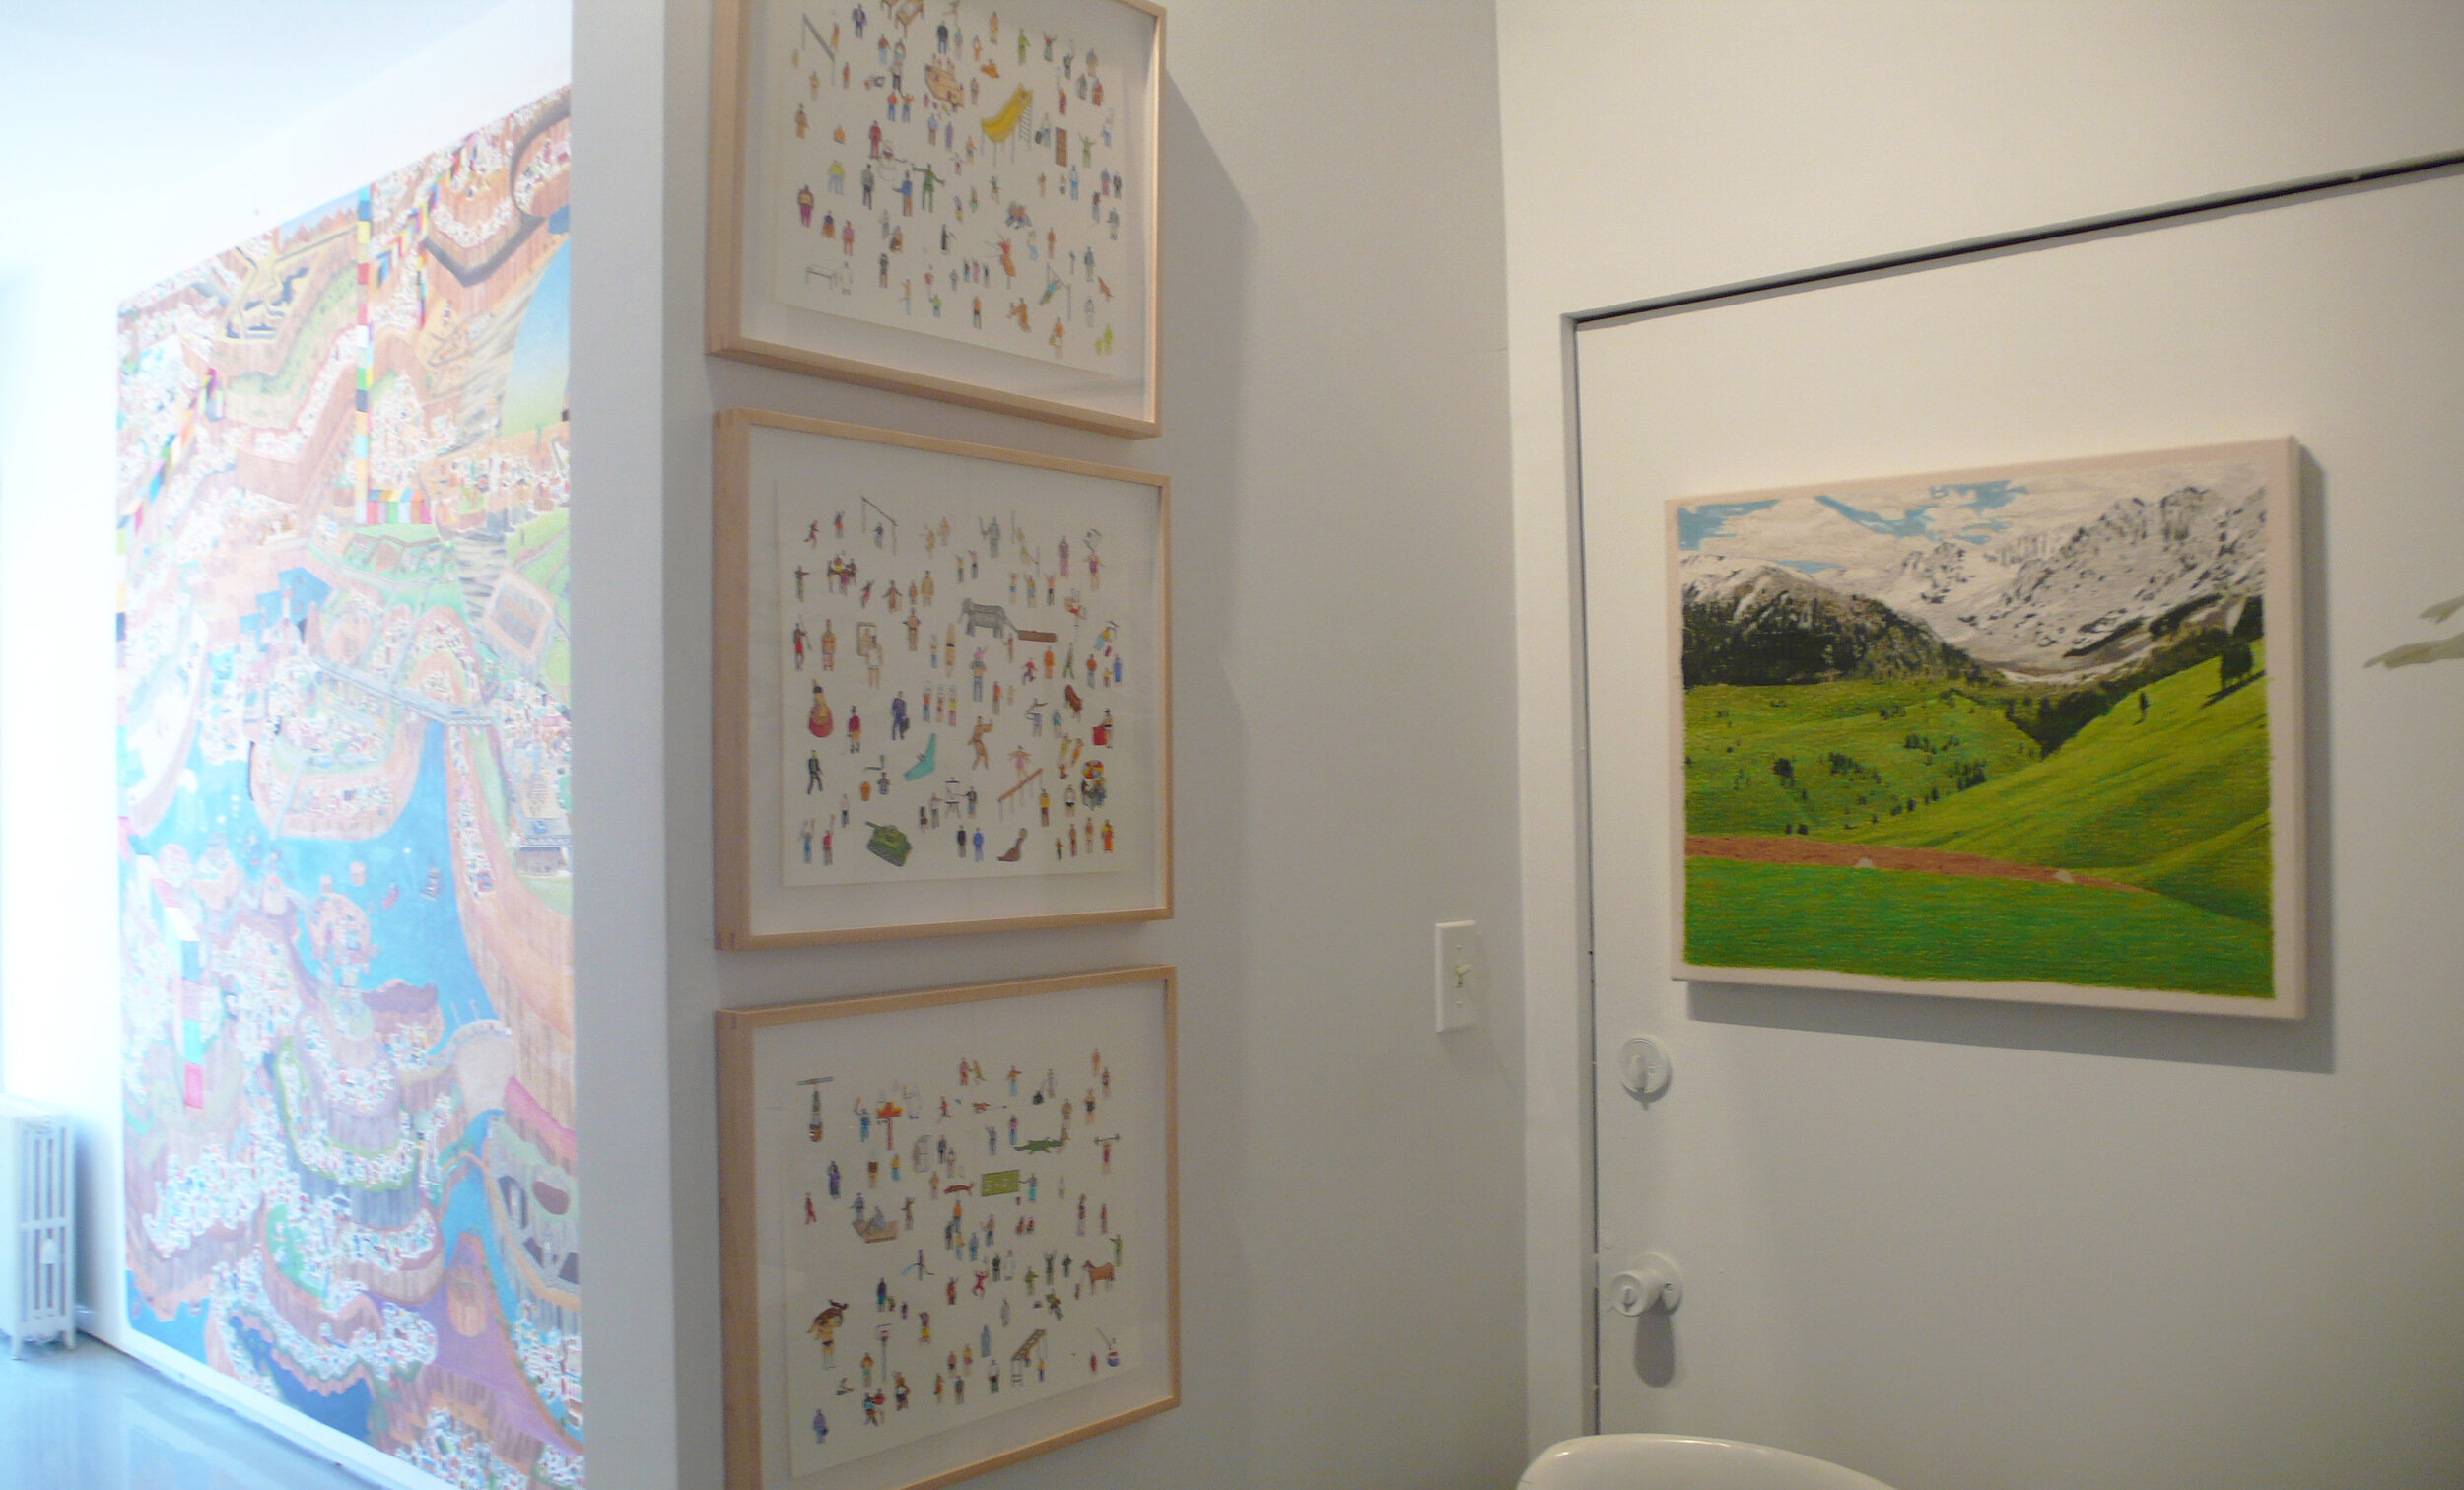 Installation image from the 2008 Christopher Daniels exhibition, The Long Way, at Cindy Rucker Gallery, Number 35